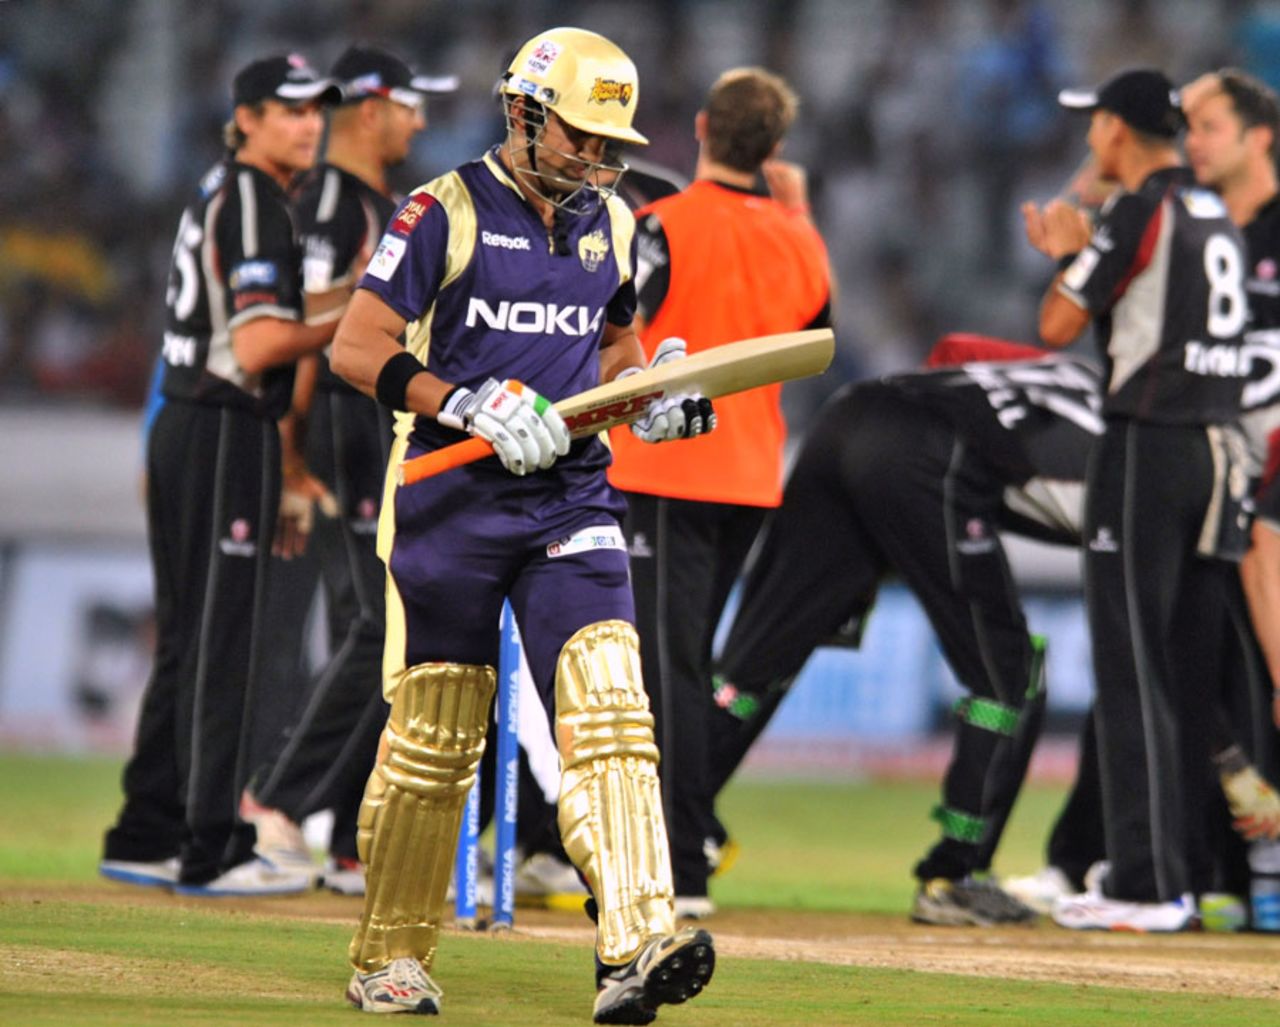 Gautam Gambhir's return to competitive cricket was not a happy one as he was out first ball, Kolkata Knight Riders v Somerset, Champions League T20, Hyderabad, September 25, 2011